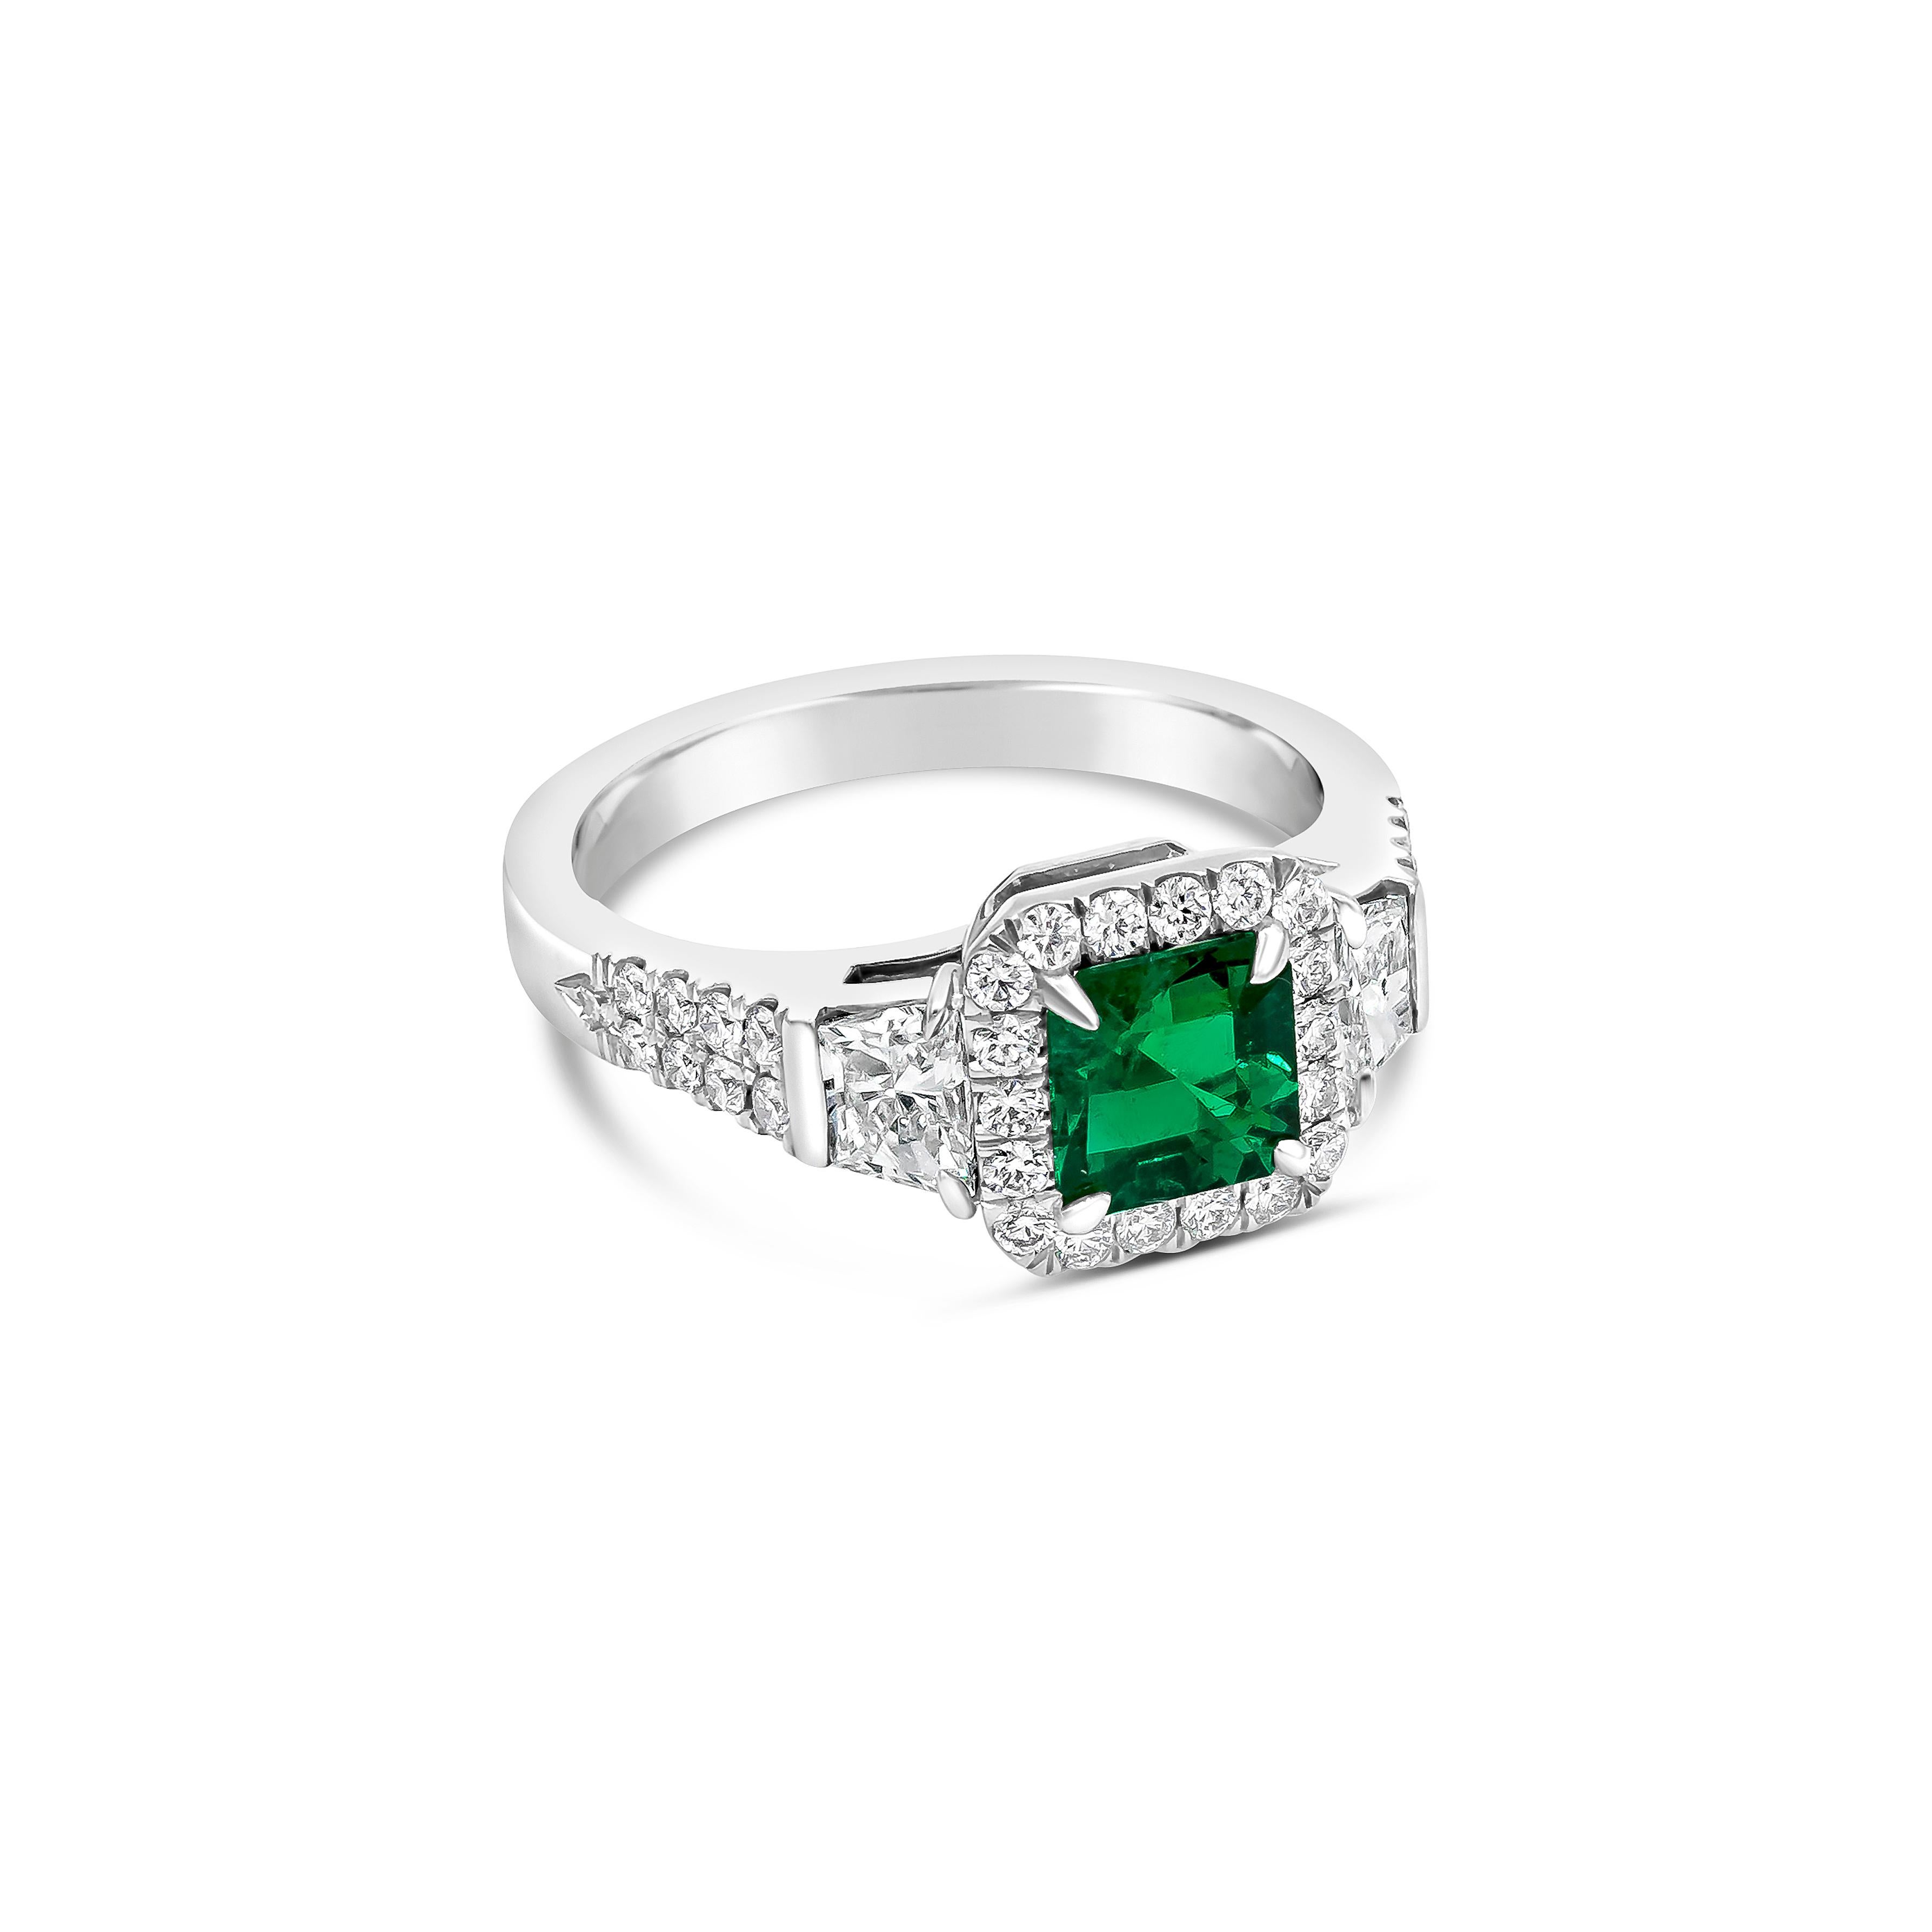 Showcases a square-shaped green emerald weighing 0.80 carats, surrounded by a single row of round diamonds. Center emerald flanked by brilliant trapezoid diamonds on an accented platinum band. Diamonds weigh 1.18 carats total. 

